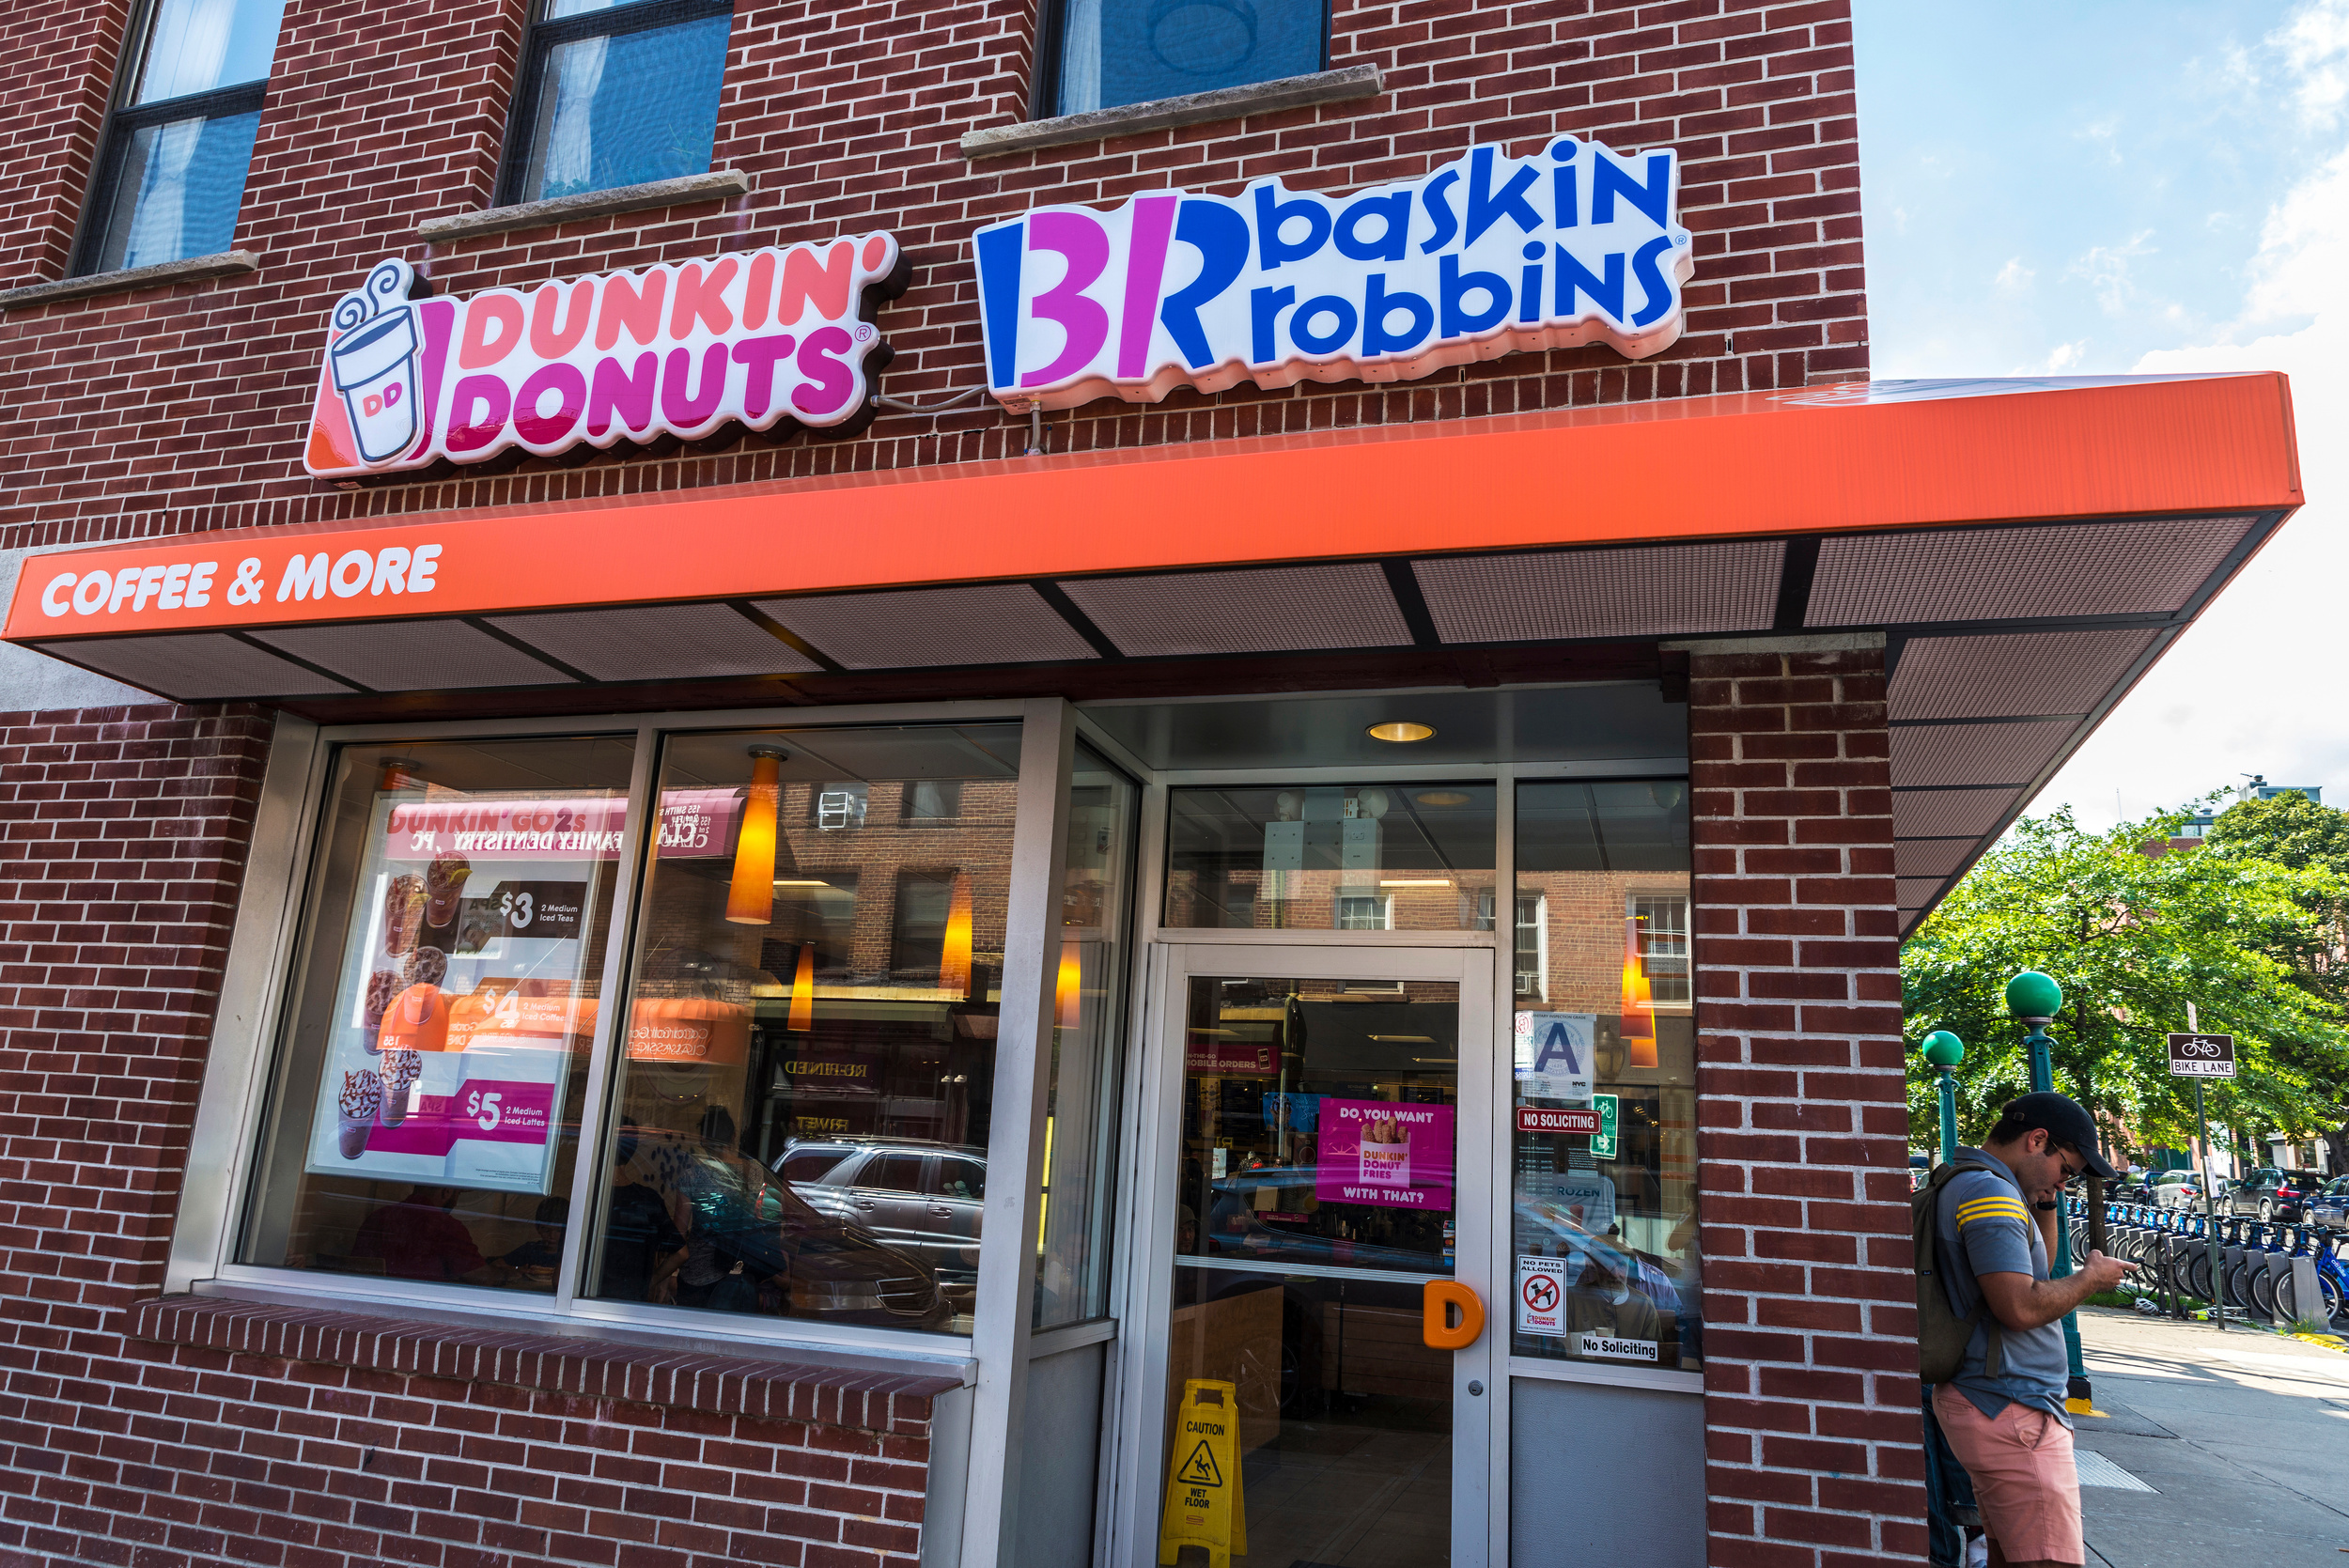 <p>You might already be aware that Dunkin’ and Baskin Robbins are owned by the same parent company, as these two brands often share a space with one another. But did you know that the same parent company (called Inspire Brands) also owns Arby’s, Buffalo Wild Wings, Jimmy John’s, Mister Donut, and Sonic? The conglomerate first came to be in 2018, when Arby’s acquired Buffalo Wild Wings, and it has continued growing ever since, with the acquisition of Dunkin’ occuring in December 2020 for a reported $11.3 billion.</p><p><a href='https://www.msn.com/en-us/community/channel/vid-cj9pqbr0vn9in2b6ddcd8sfgpfq6x6utp44fssrv6mc2gtybw0us'>Follow us on MSN to see more of our exclusive lifestyle content.</a></p>